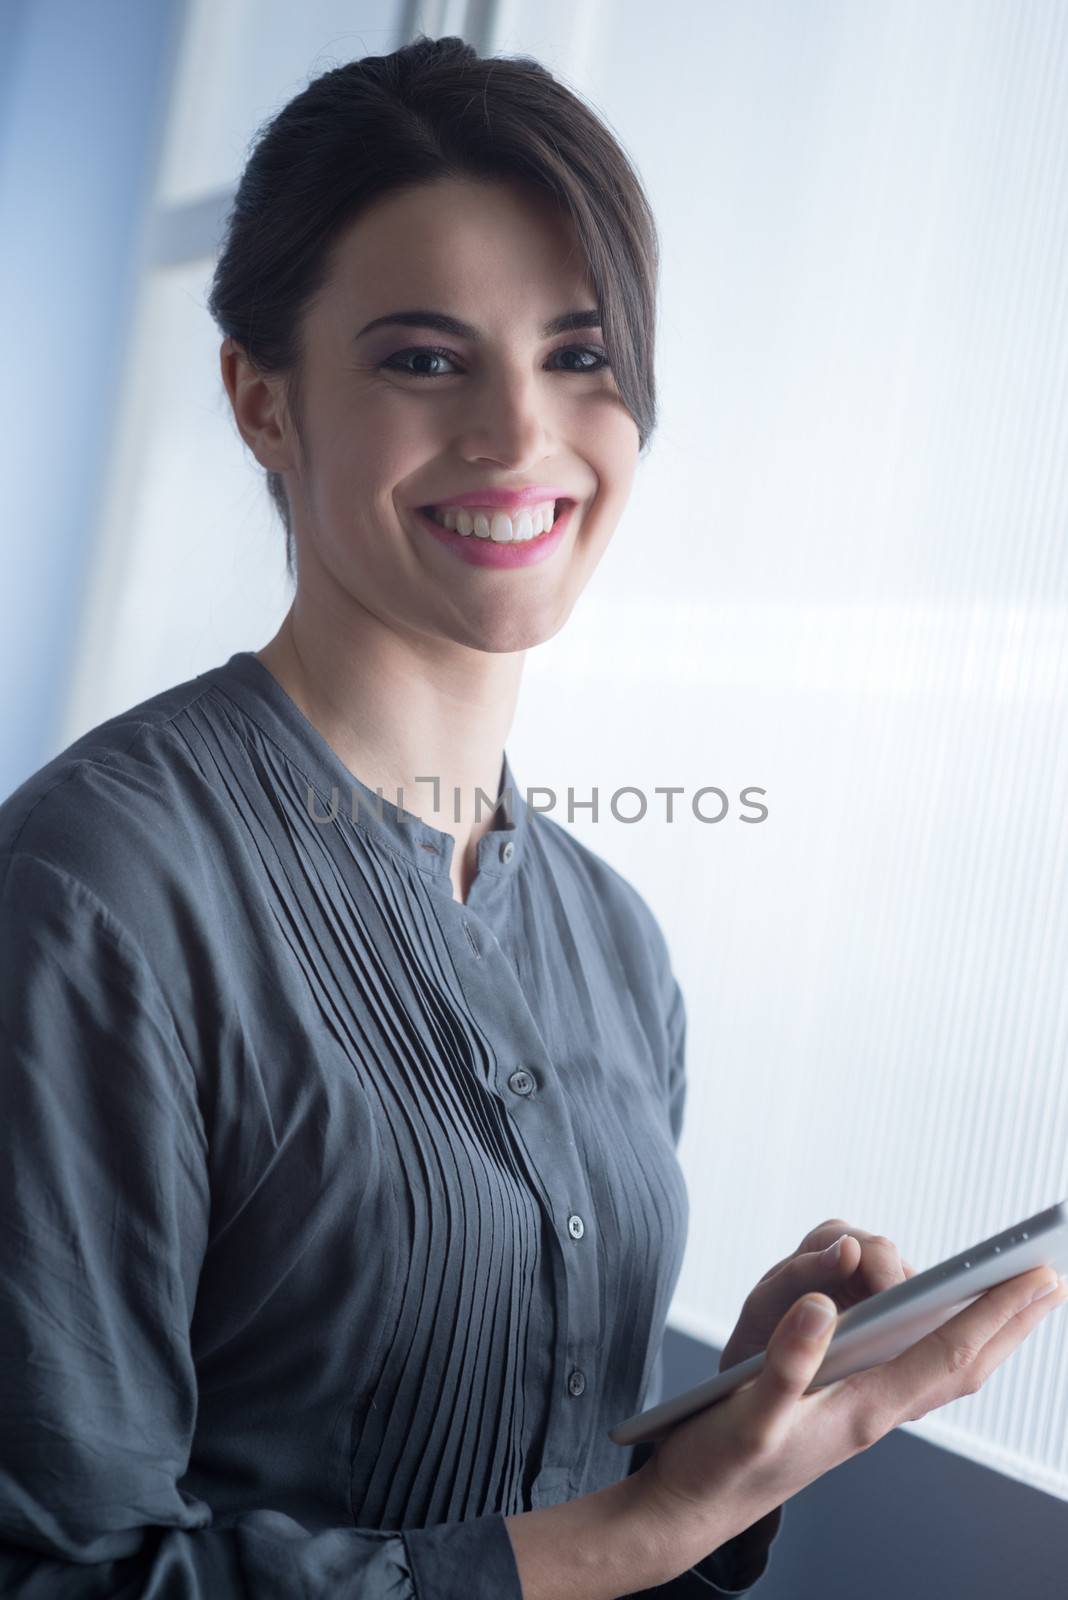 Beautiful woman smiling and using a digital tablet in front of a window.